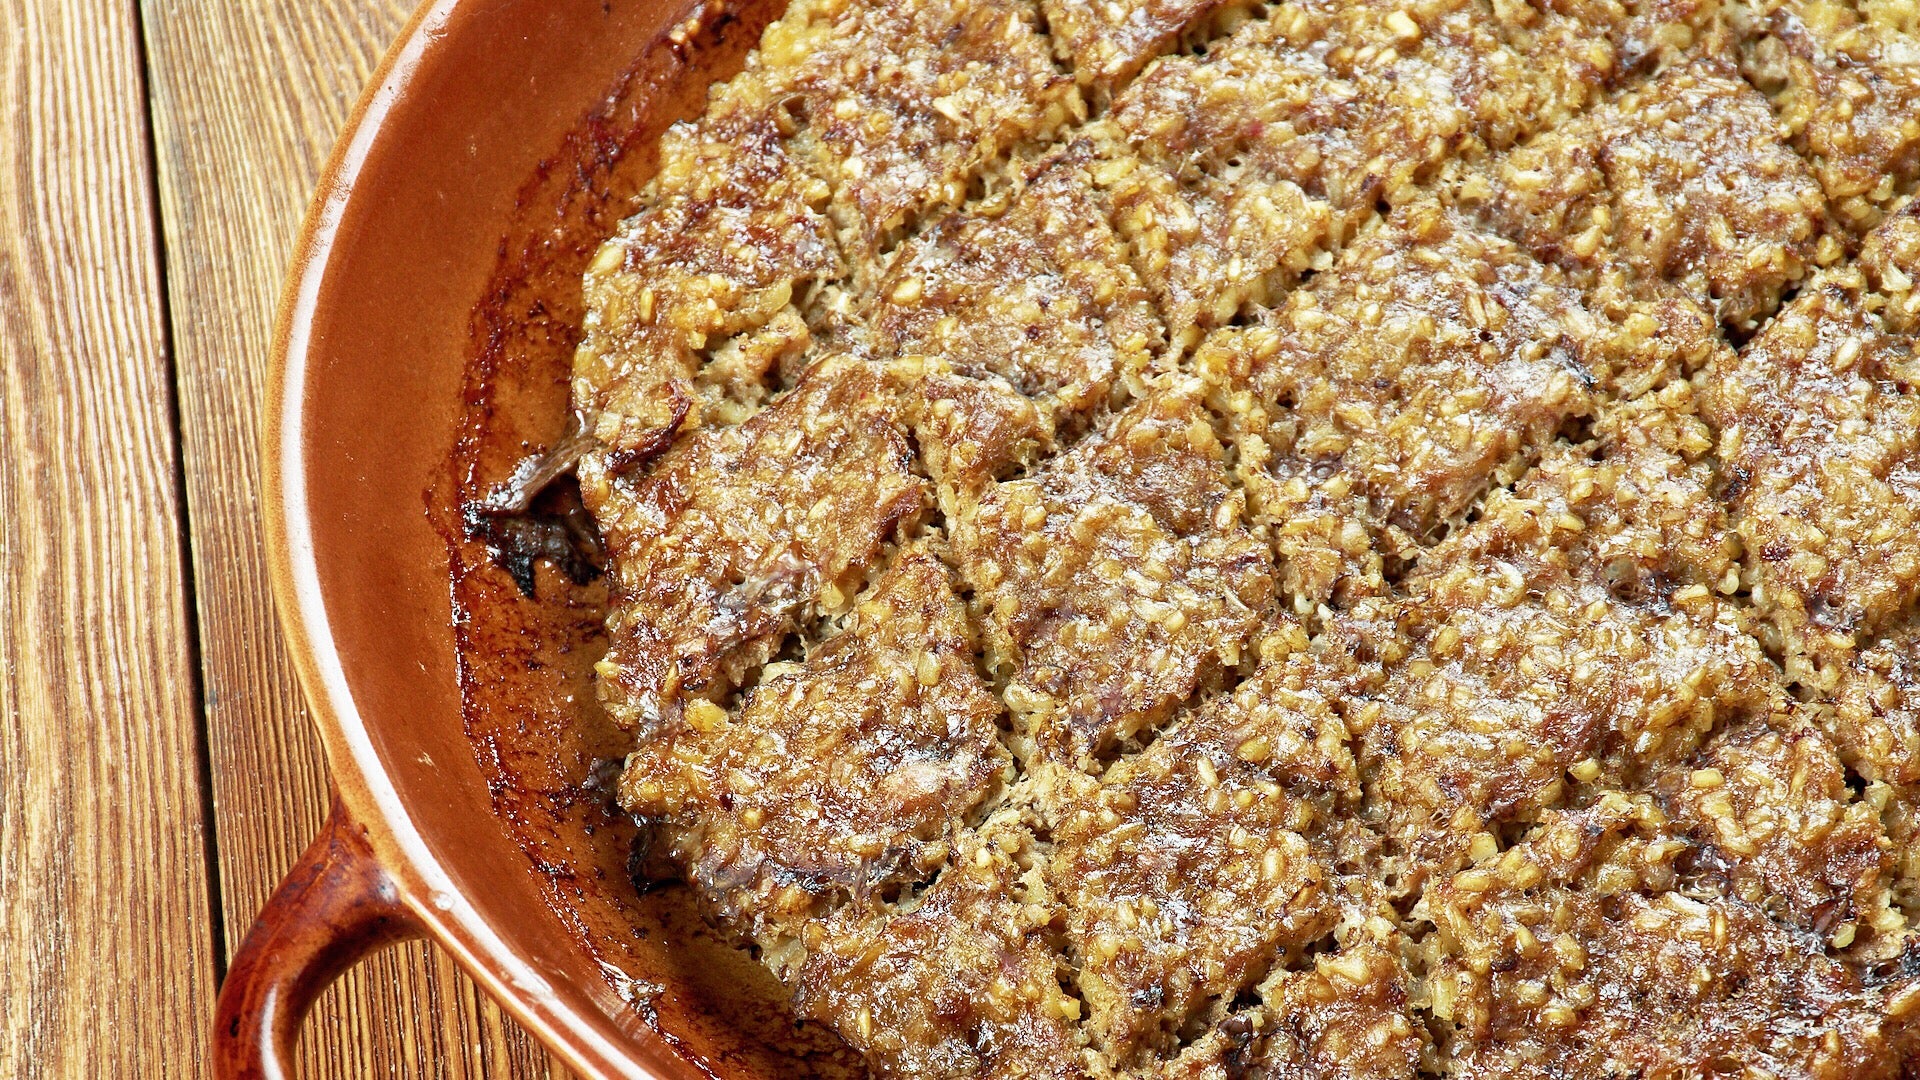 Make This Syrian Kibbeh Casserole When Your Budget Is Tight